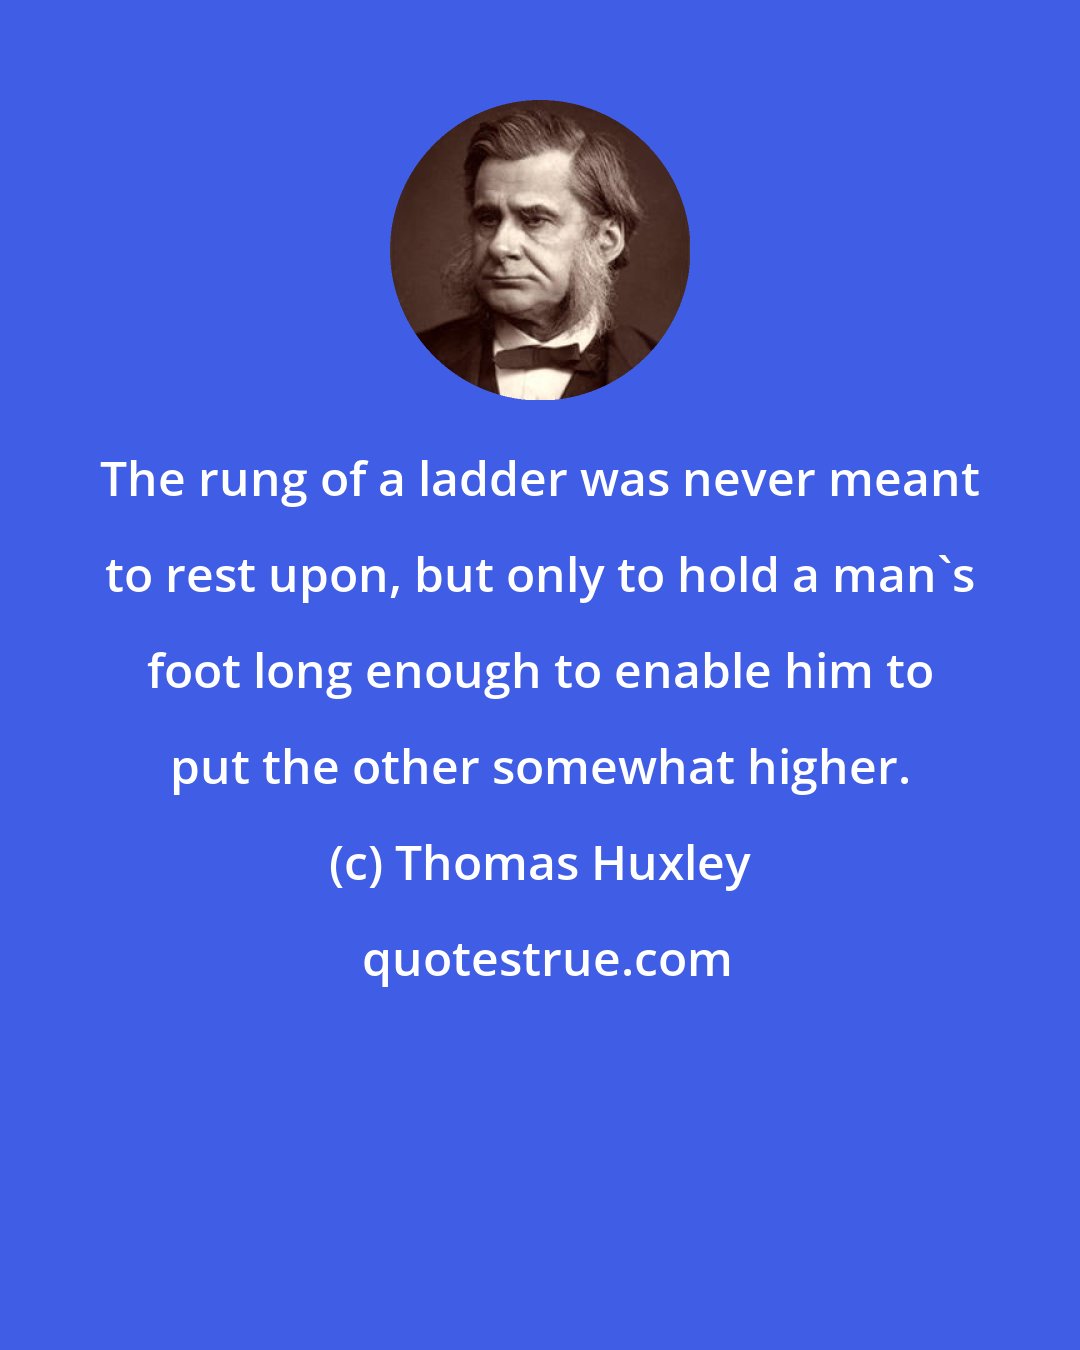 Thomas Huxley: The rung of a ladder was never meant to rest upon, but only to hold a man's foot long enough to enable him to put the other somewhat higher.